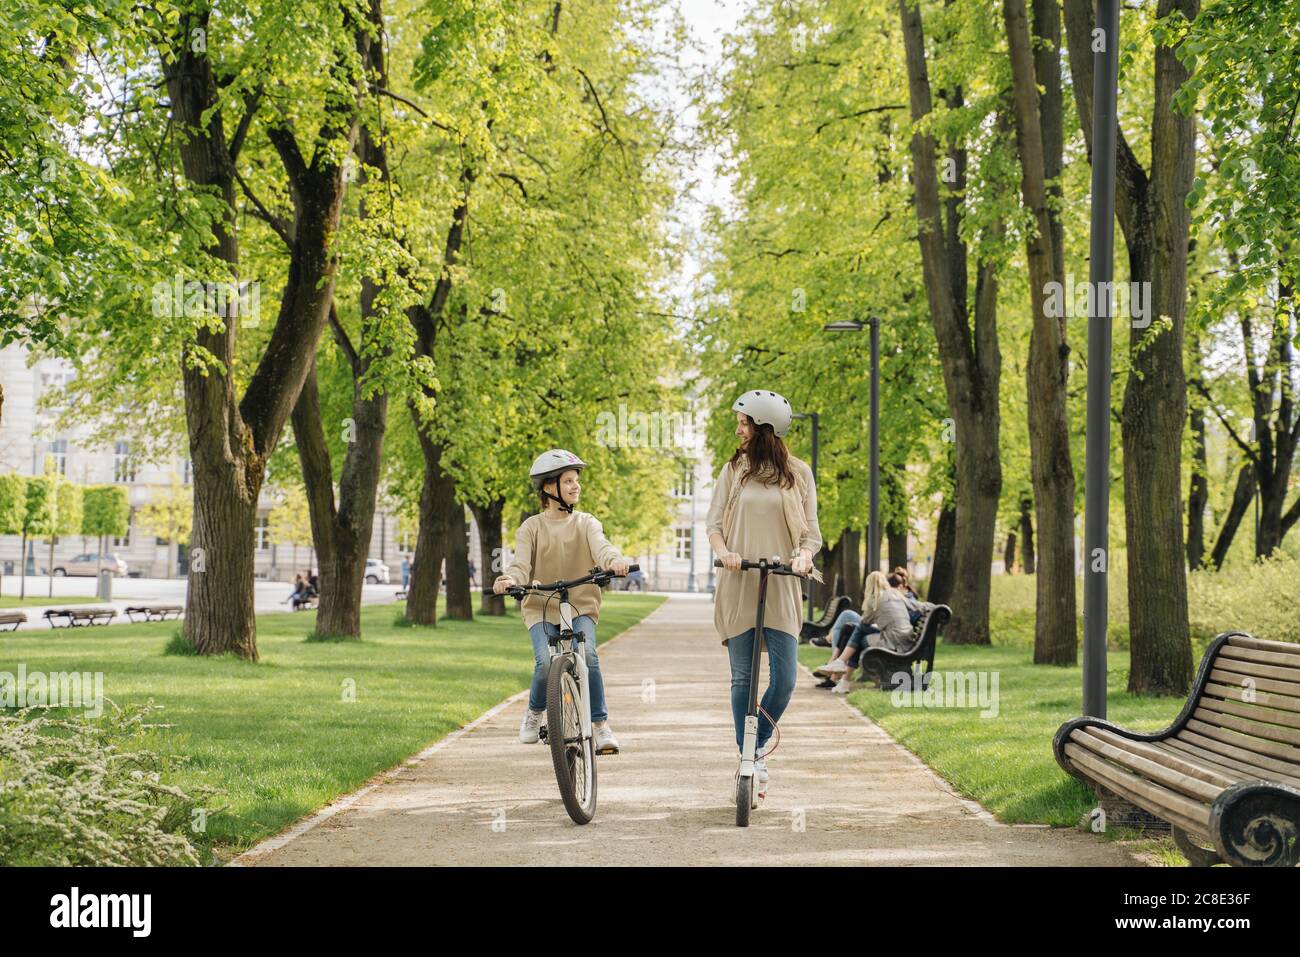 Girl cycling while mother riding electric scooter on road in city park Stock Photo